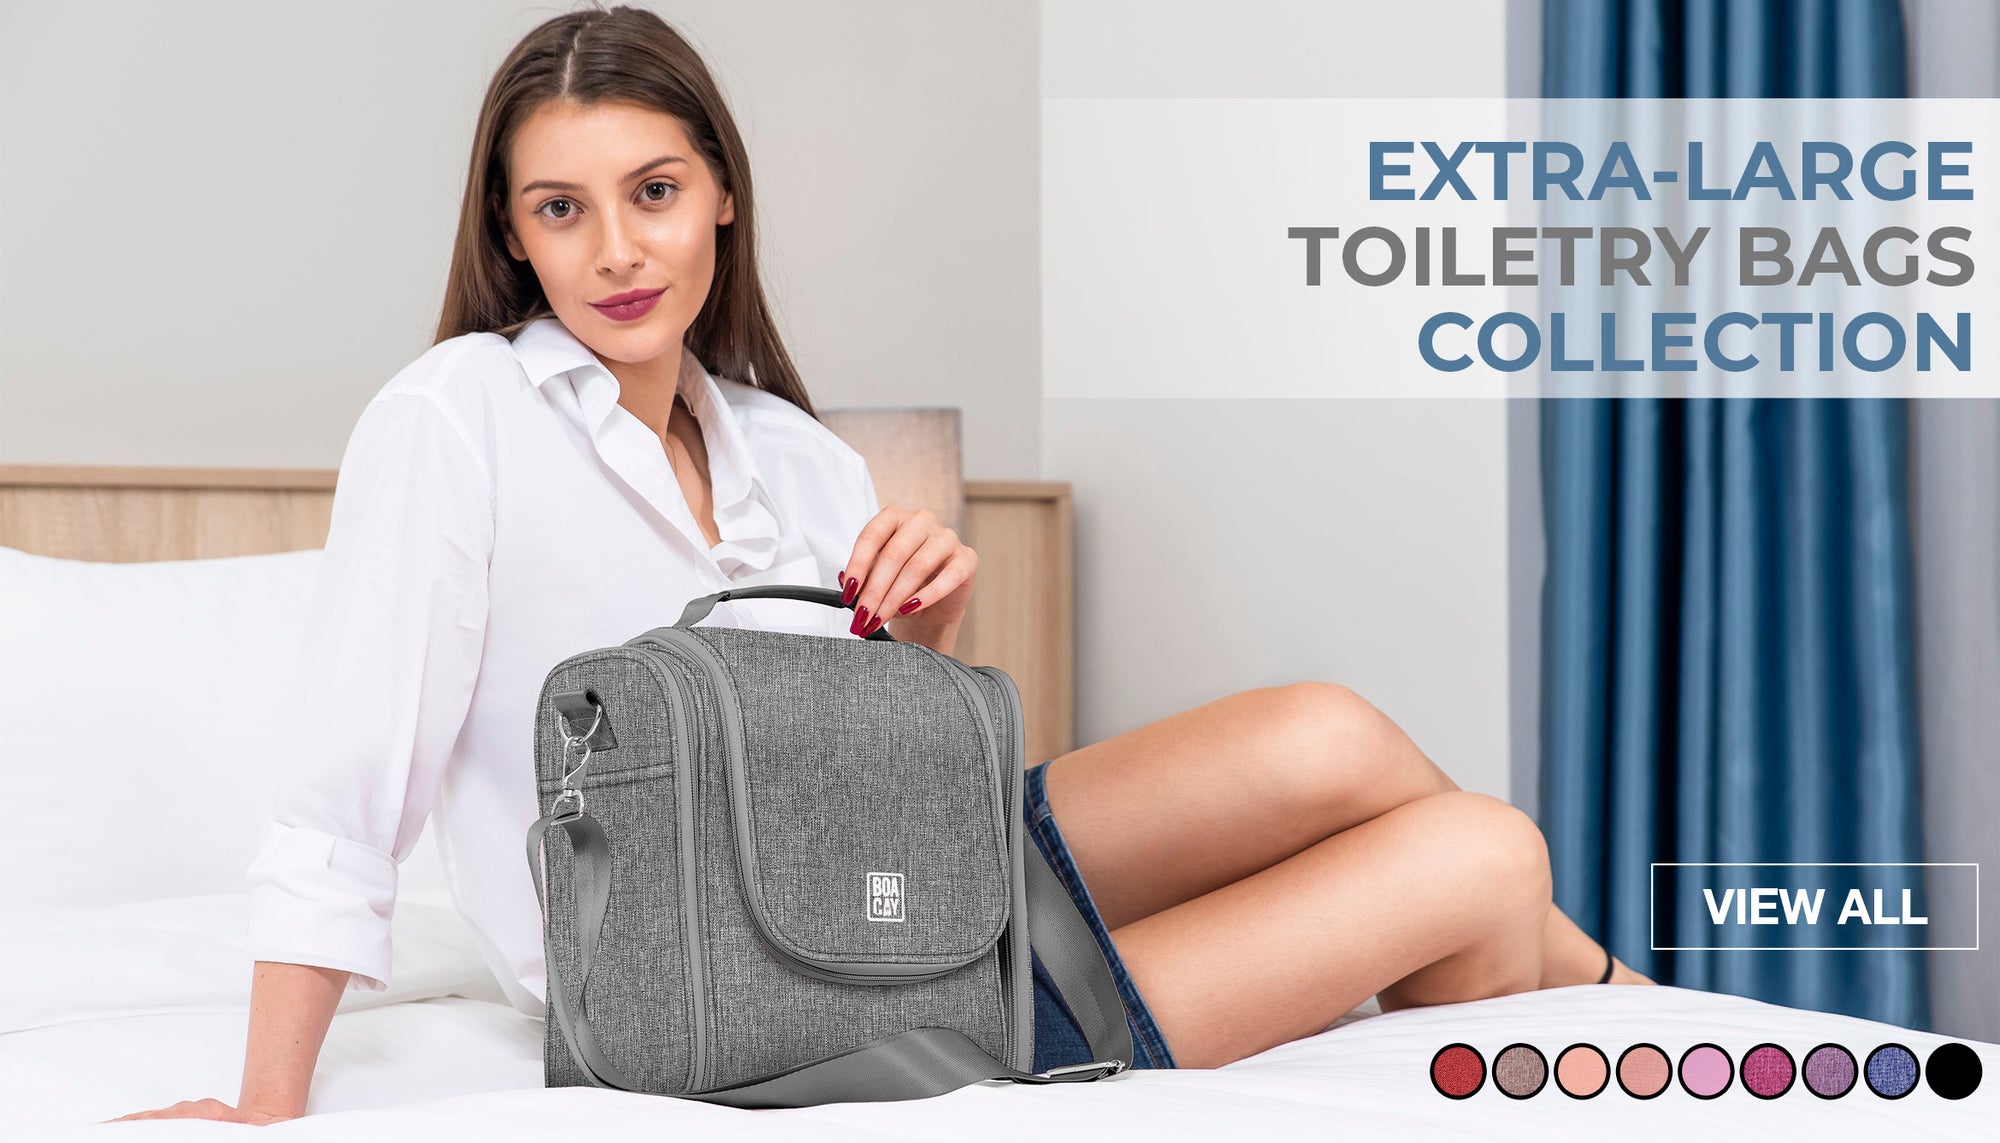 BOACAY Small Gray Hanging Travel Toiletry Bag for Women and Men